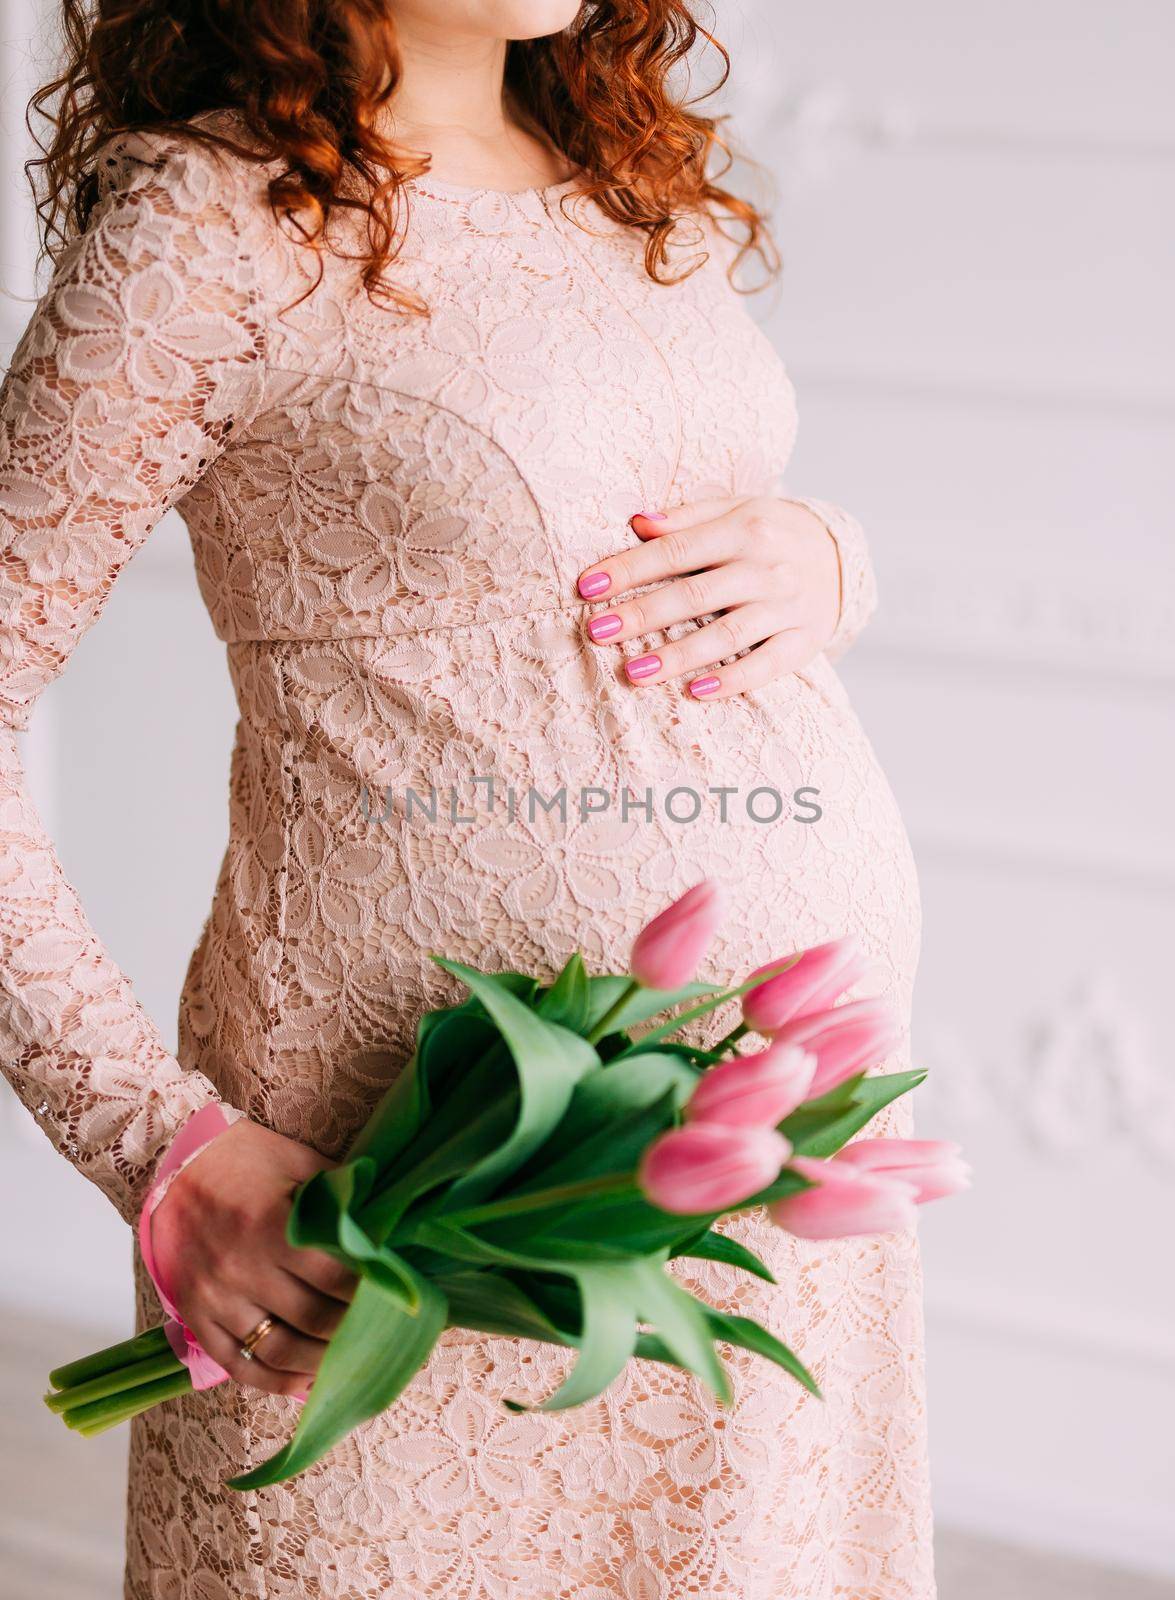 Belly of a pregnant girl and tulips in hands by Nadtochiy